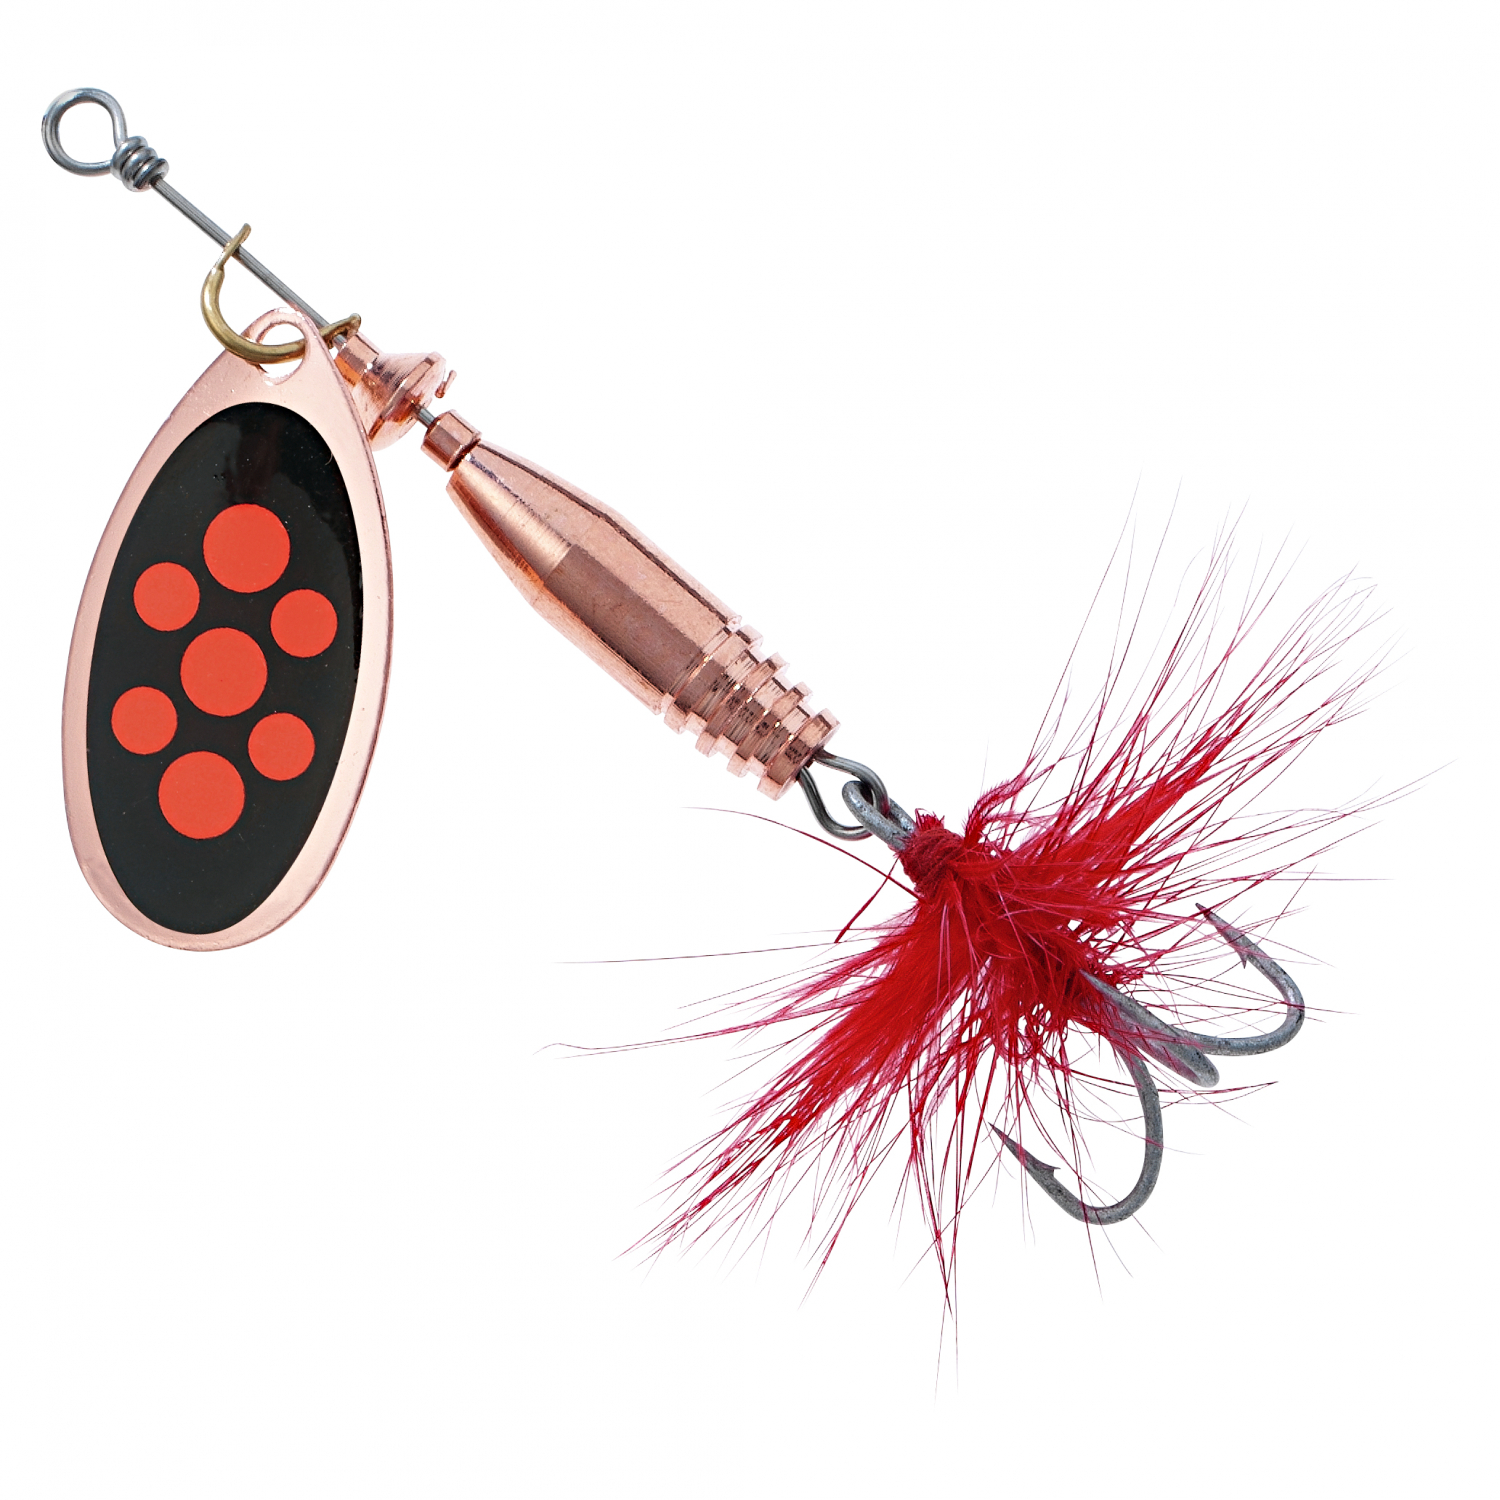 Colonel Spinner Original Classic Standard (copper-black with red dots) 